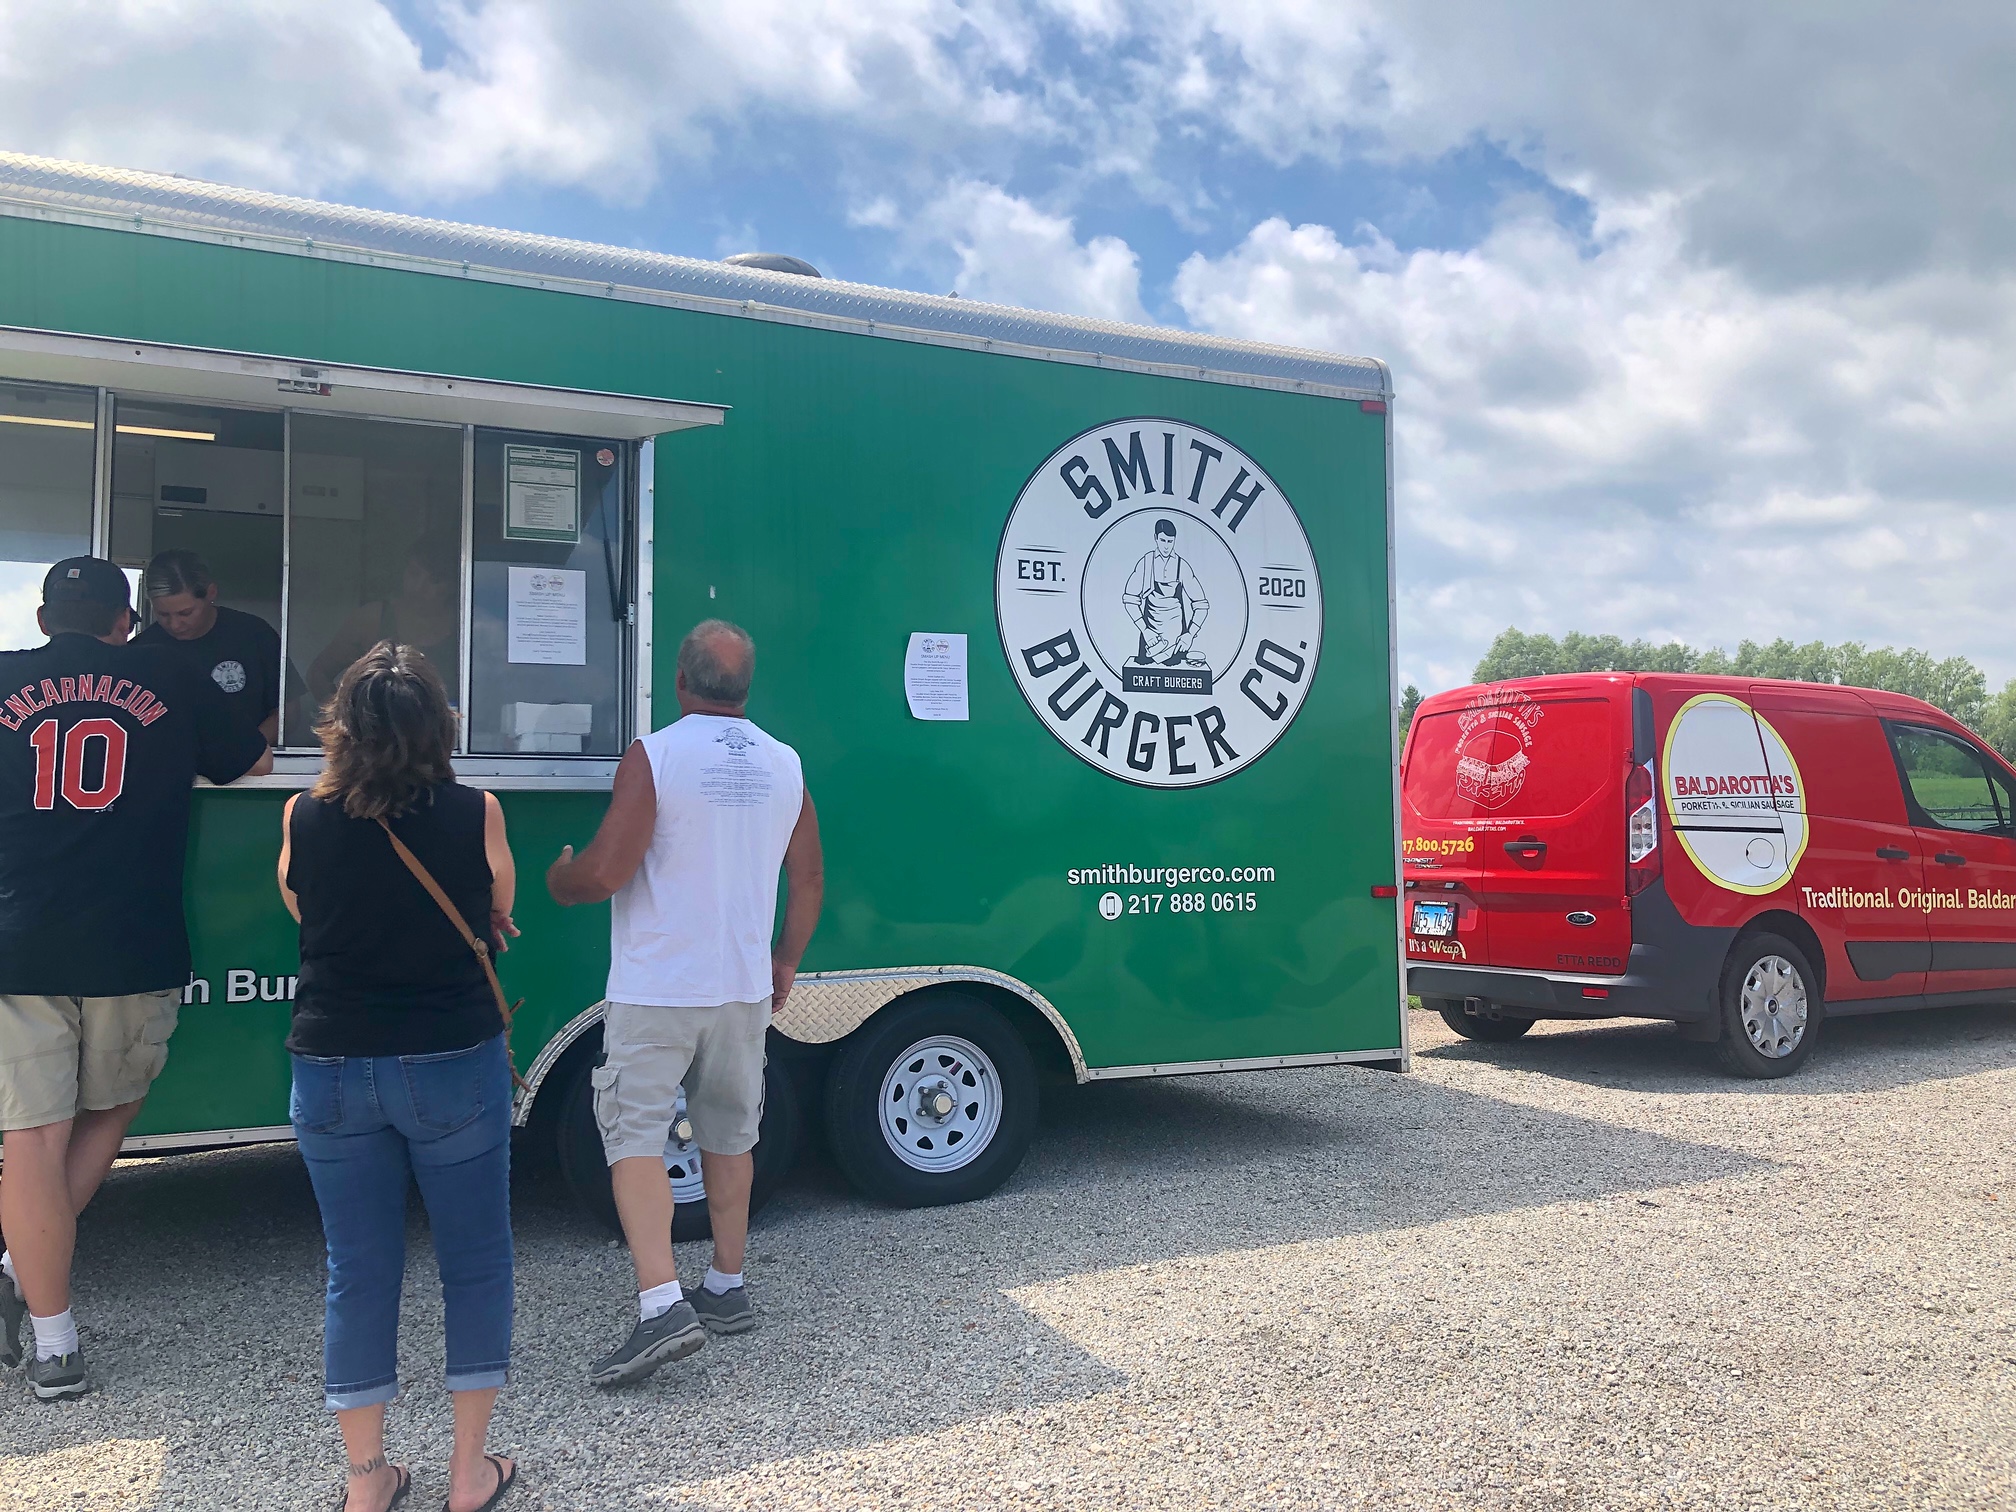 The green food truck of Smash Burgers sits parked beside the red van of Baldarotta's in the gravel lot by Riggs. Photo by Alyssa Buckley.